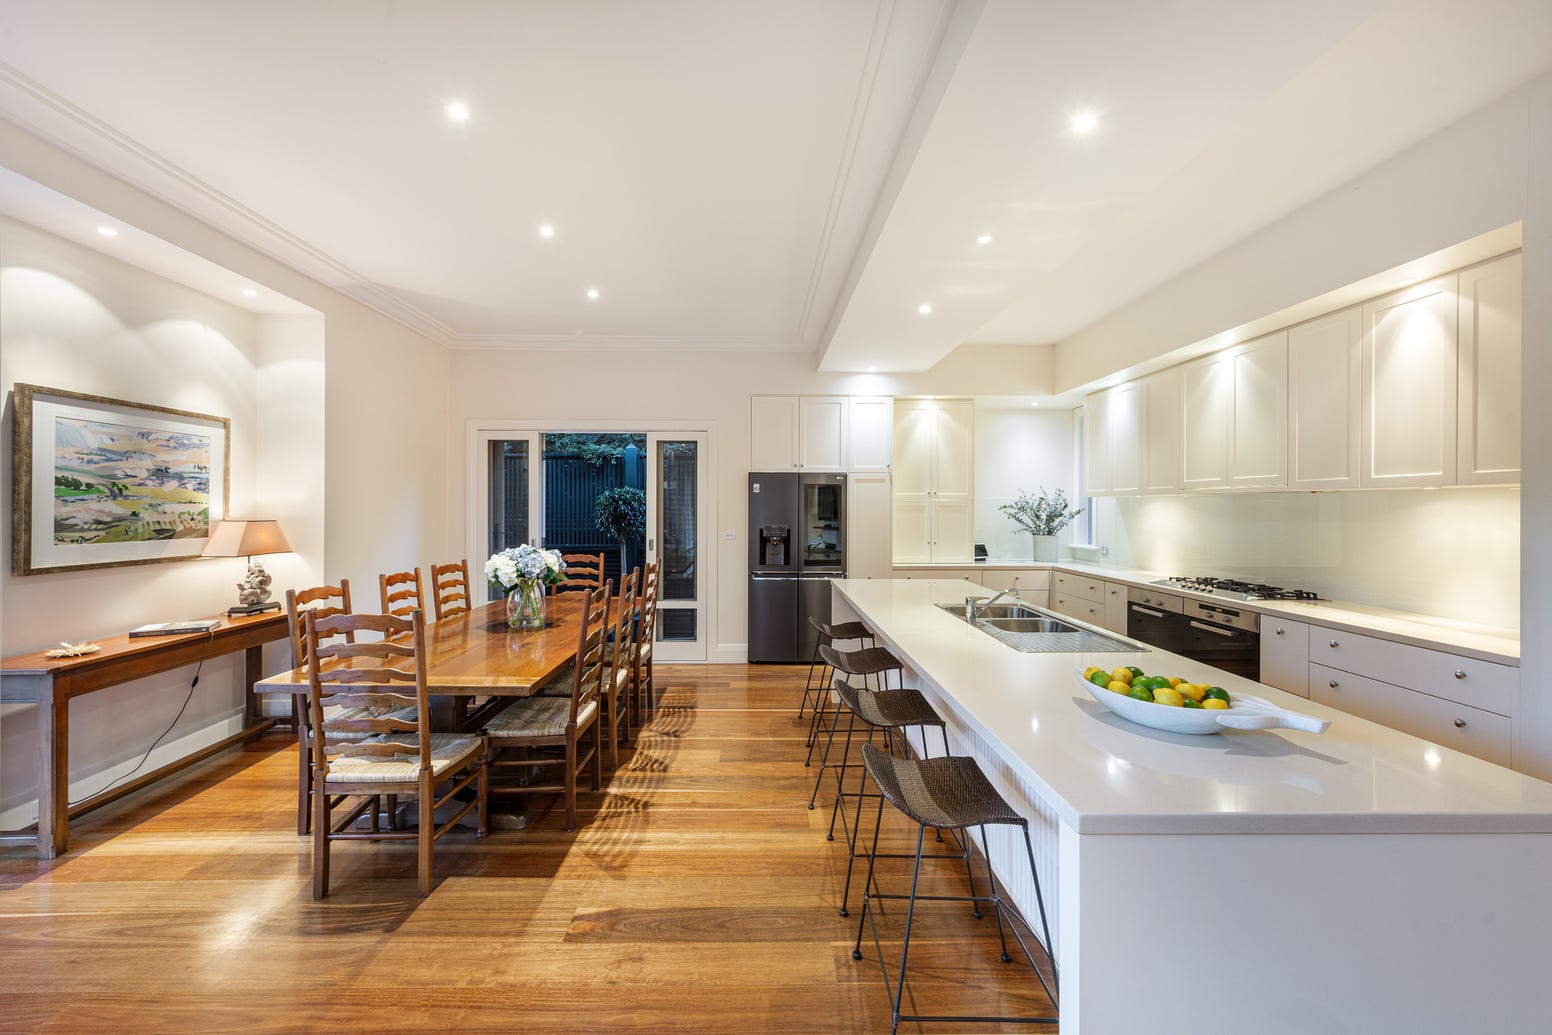 Kitchen Designs Trends from Melbourne's Most Expensive Properties Sold ($3M+)